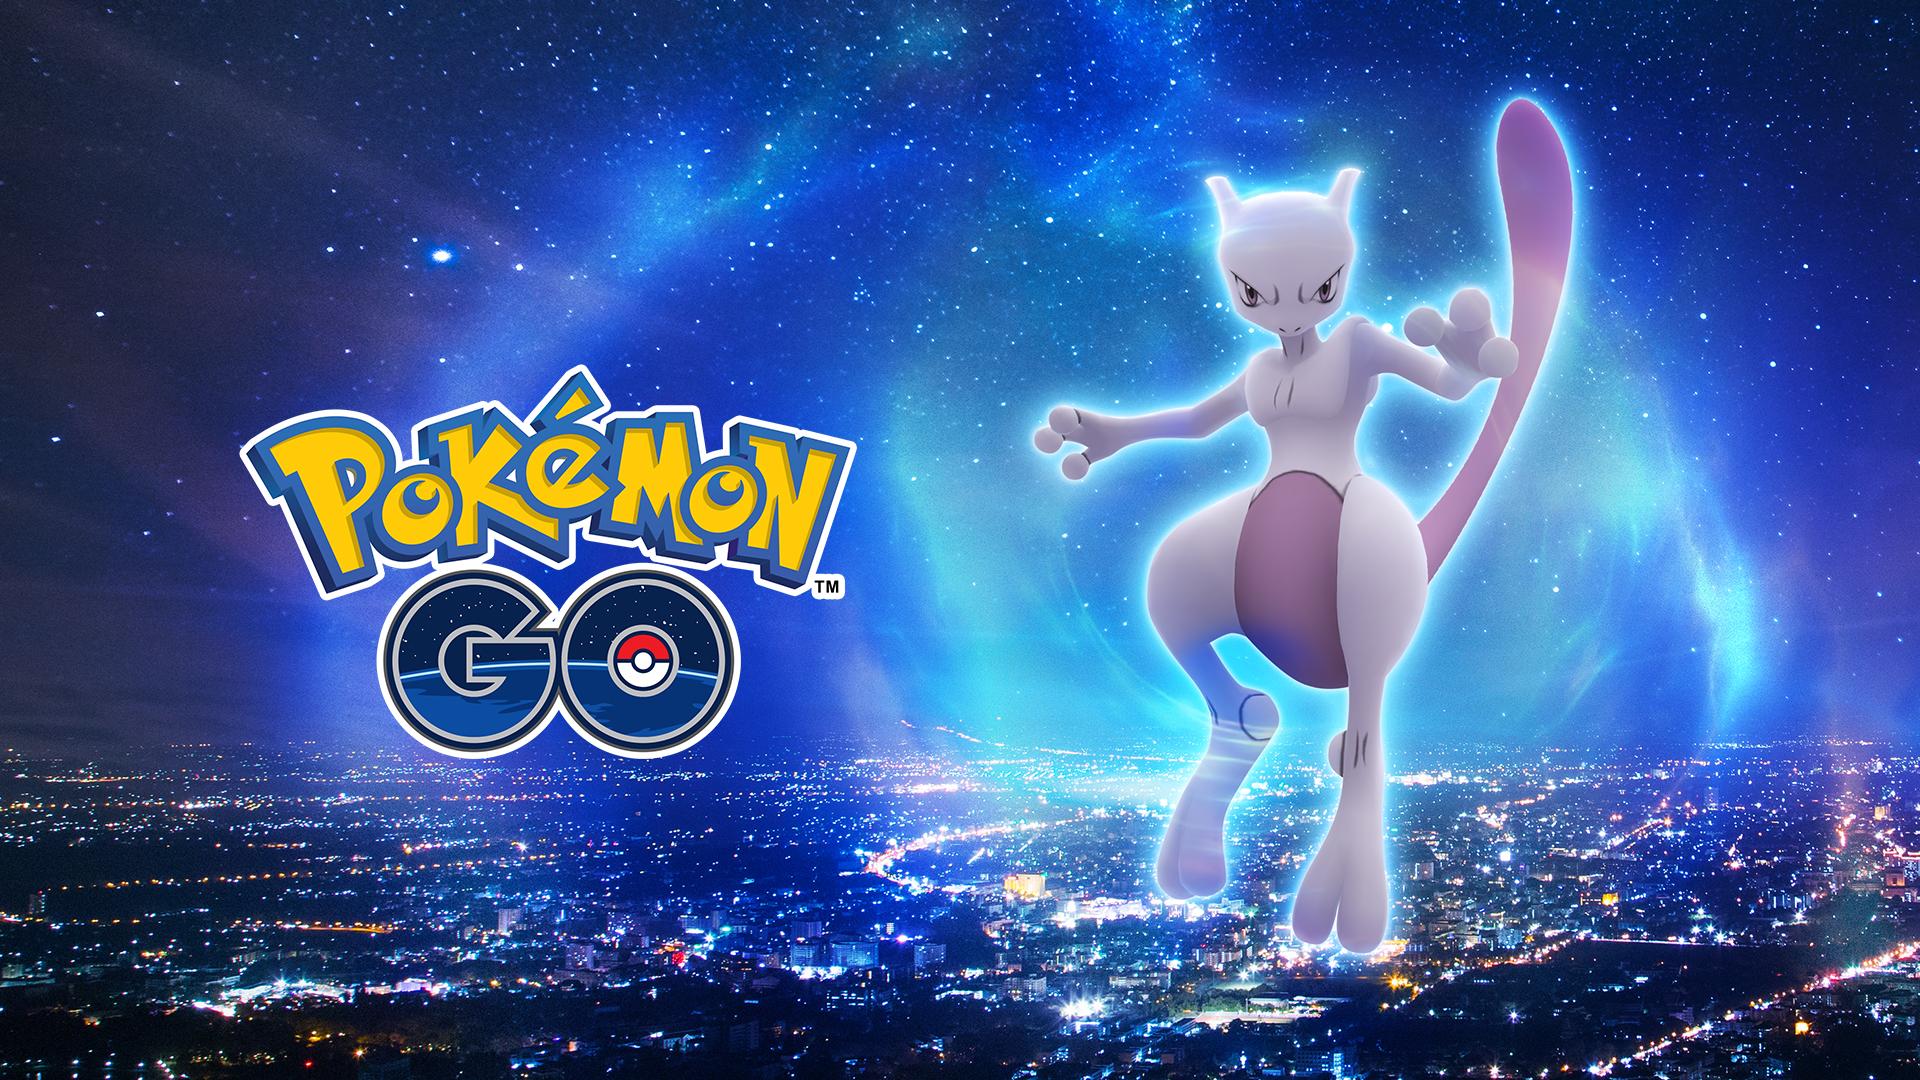 Image for Pokemon Go Season of Go sees the return of Mewtwo, Kyogre, Groudon and Adventure Week